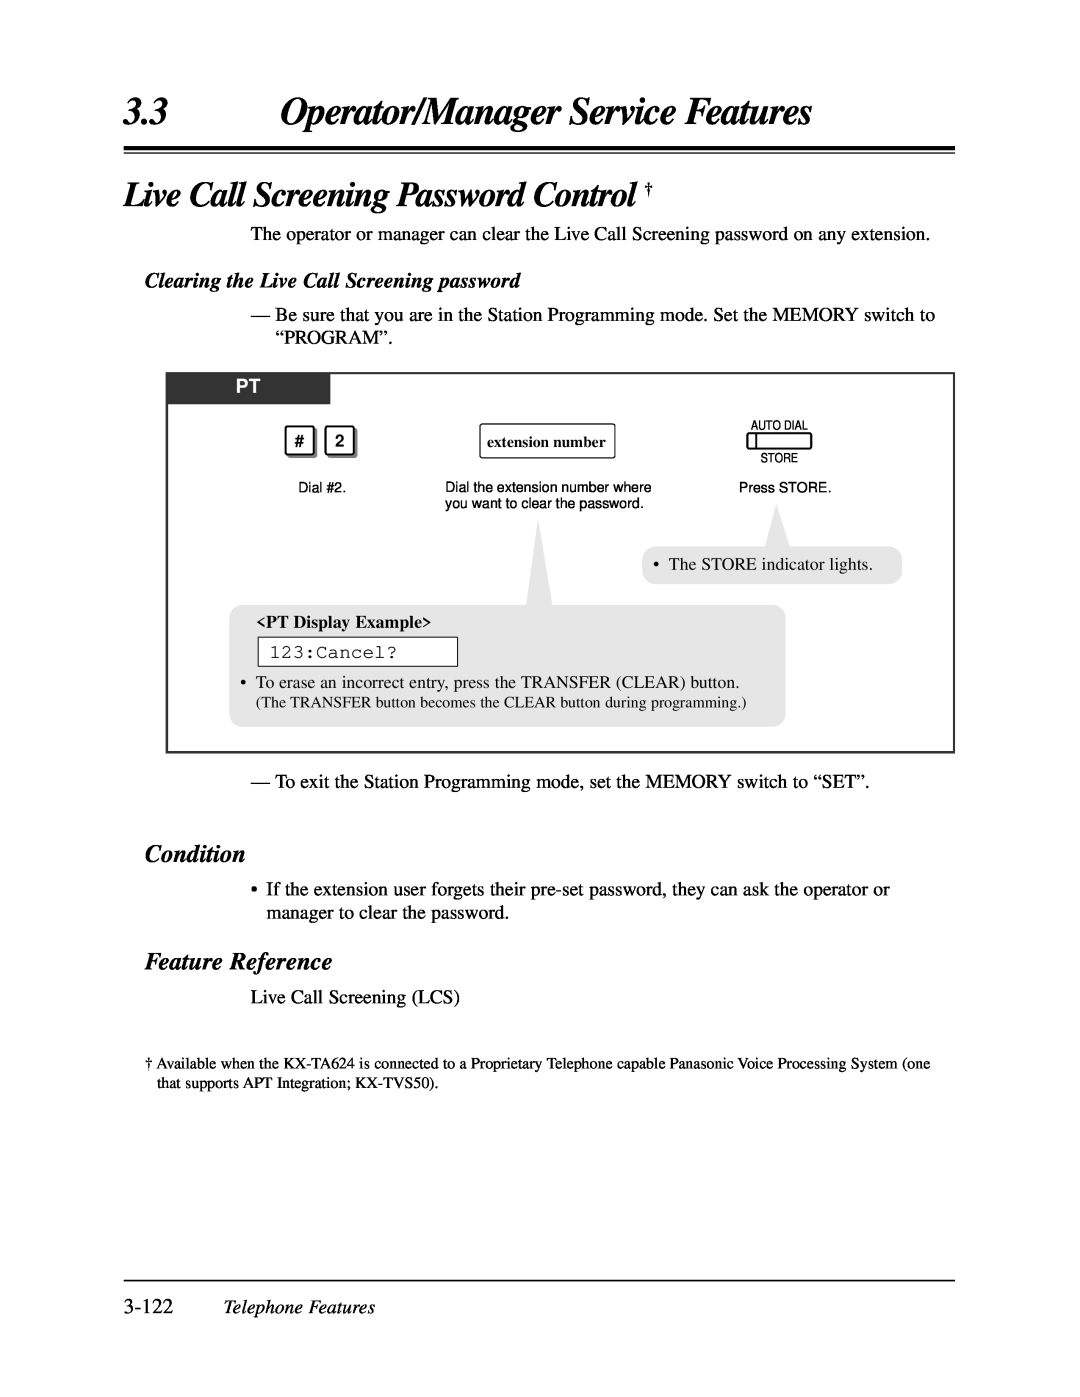 Panasonic KX-TA624 user manual Live Call Screening Password Control †, Clearing the Live Call Screening password, Condition 